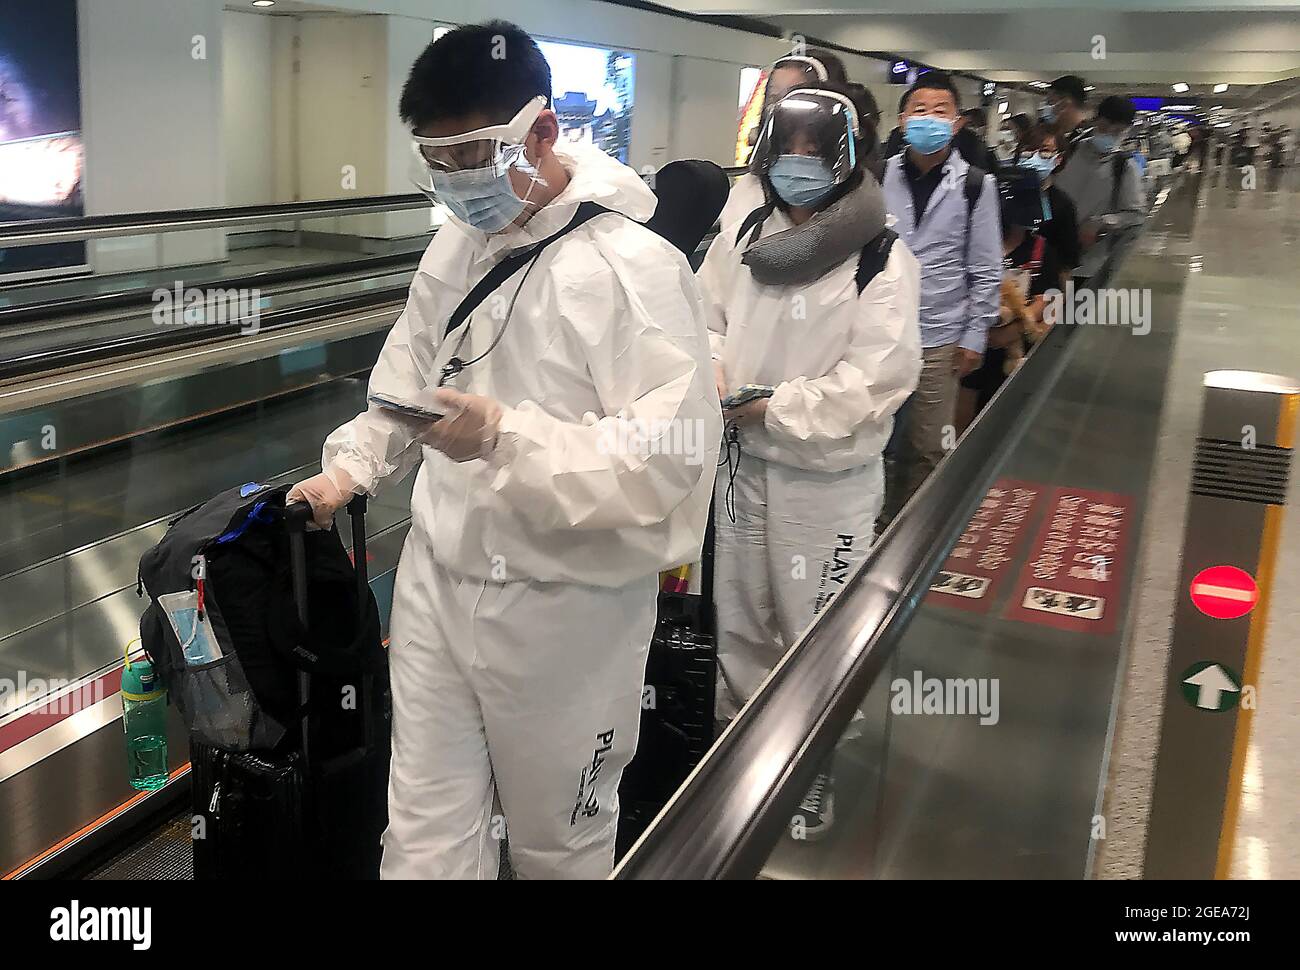 Hong Kong, China. 18th Aug, 2021. Passengers wear full body personal protective equipment (PPE) while transiting through Hong Kong's international airport on Wednesday, August 18, 2021. Hong Kong remains on high alert for the threat of a new Covid outbreak as it remains a major travel hub and destination in Asia. Photo by Stephen Shaver/UPI Credit: UPI/Alamy Live News Stock Photo